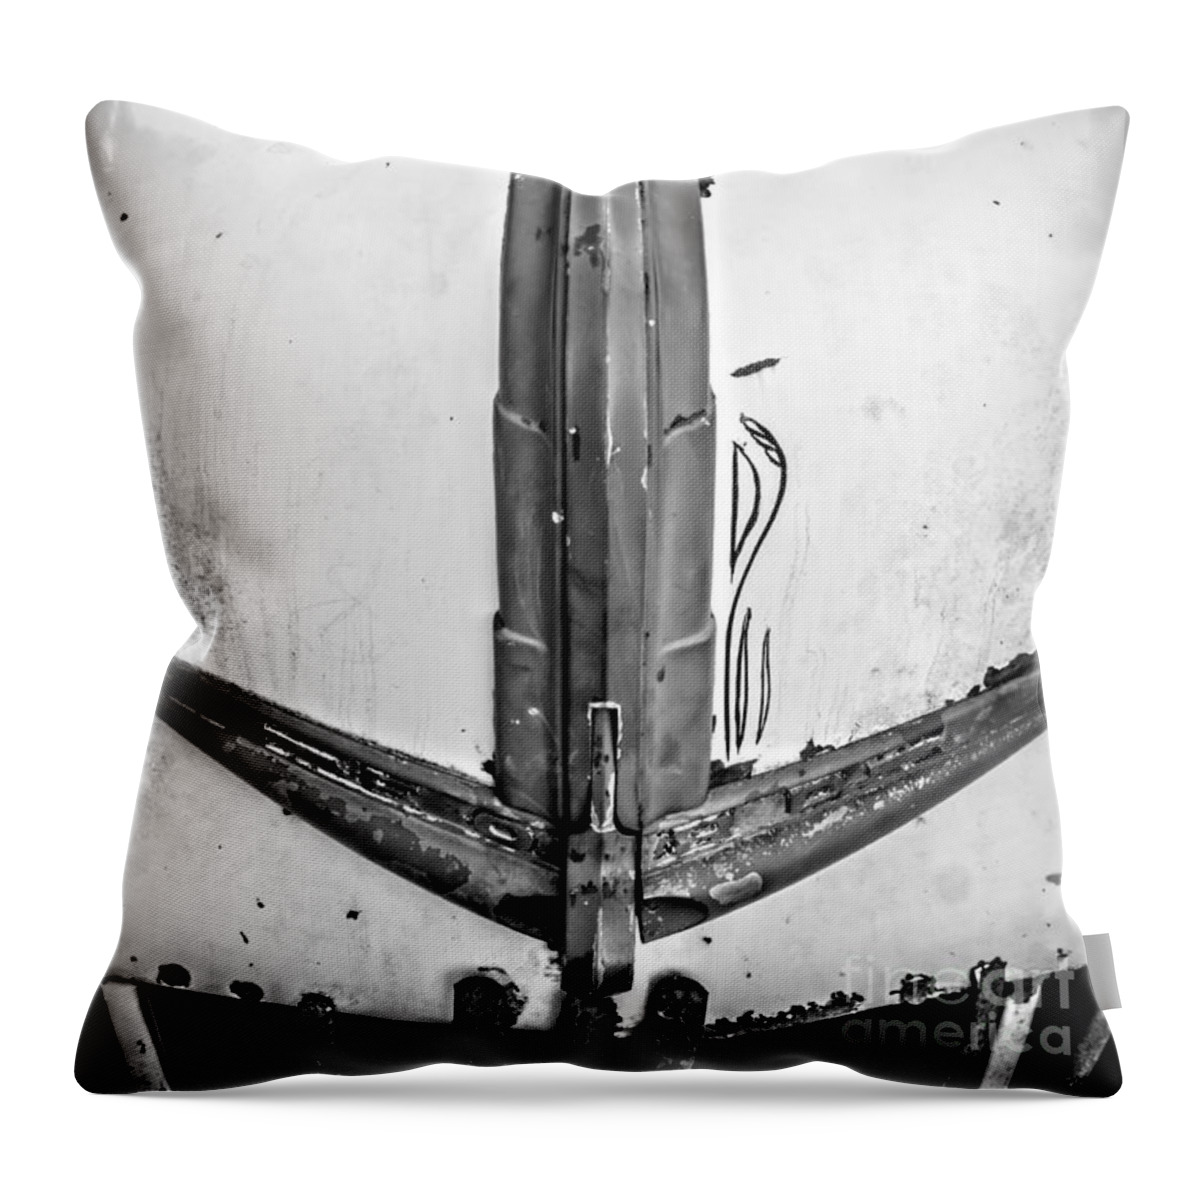 Ford Throw Pillow featuring the photograph 1940's Ford Pickup by James Aiken